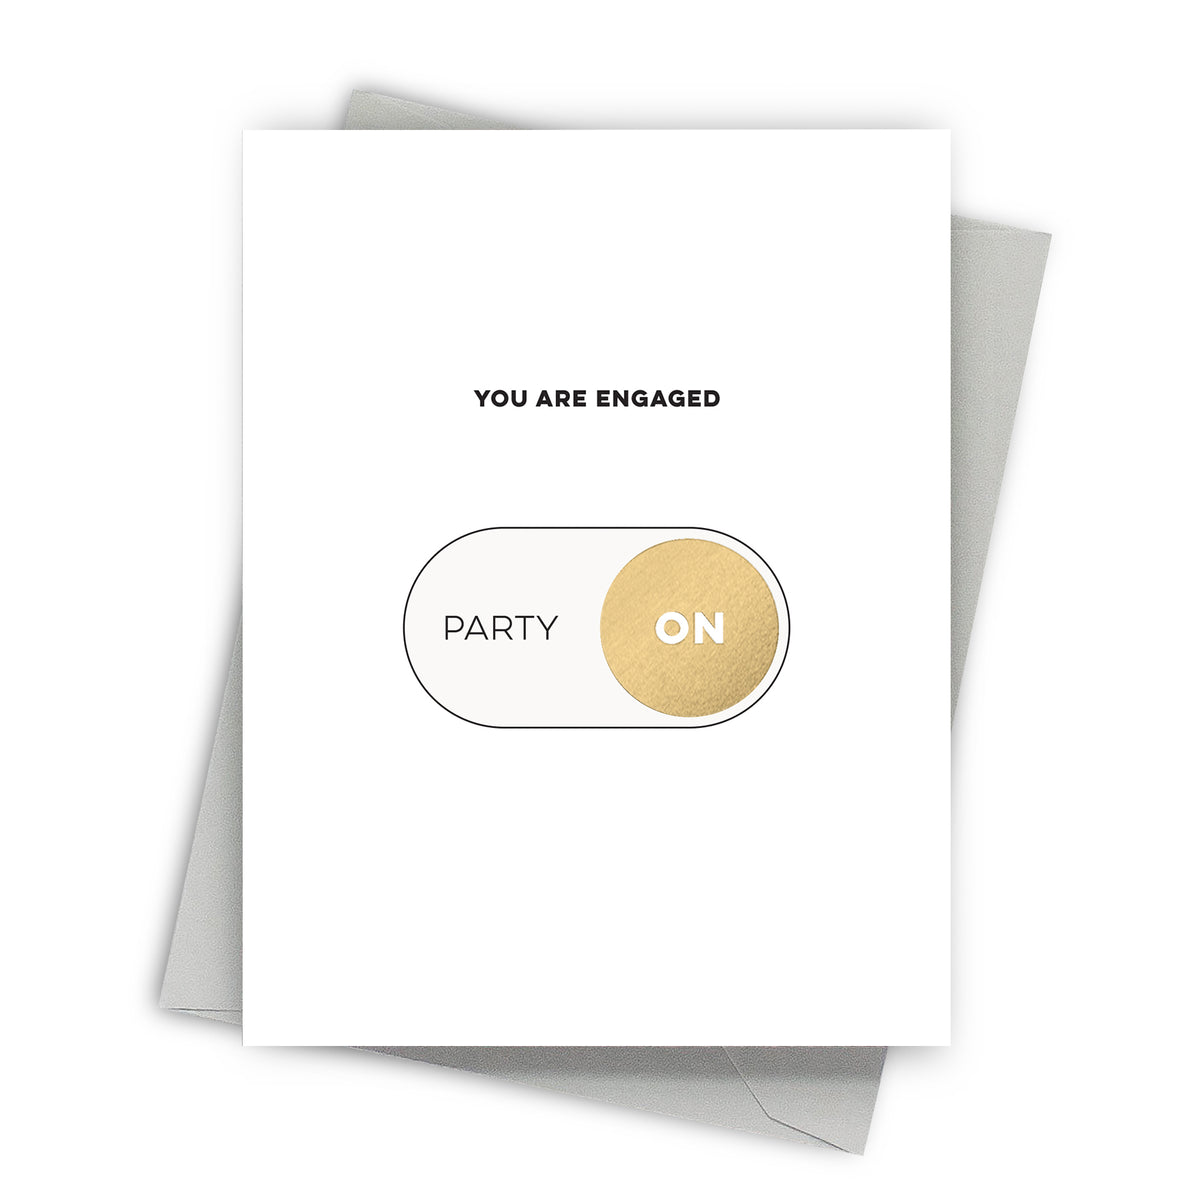 Party On Engagement Card by Fine Moments